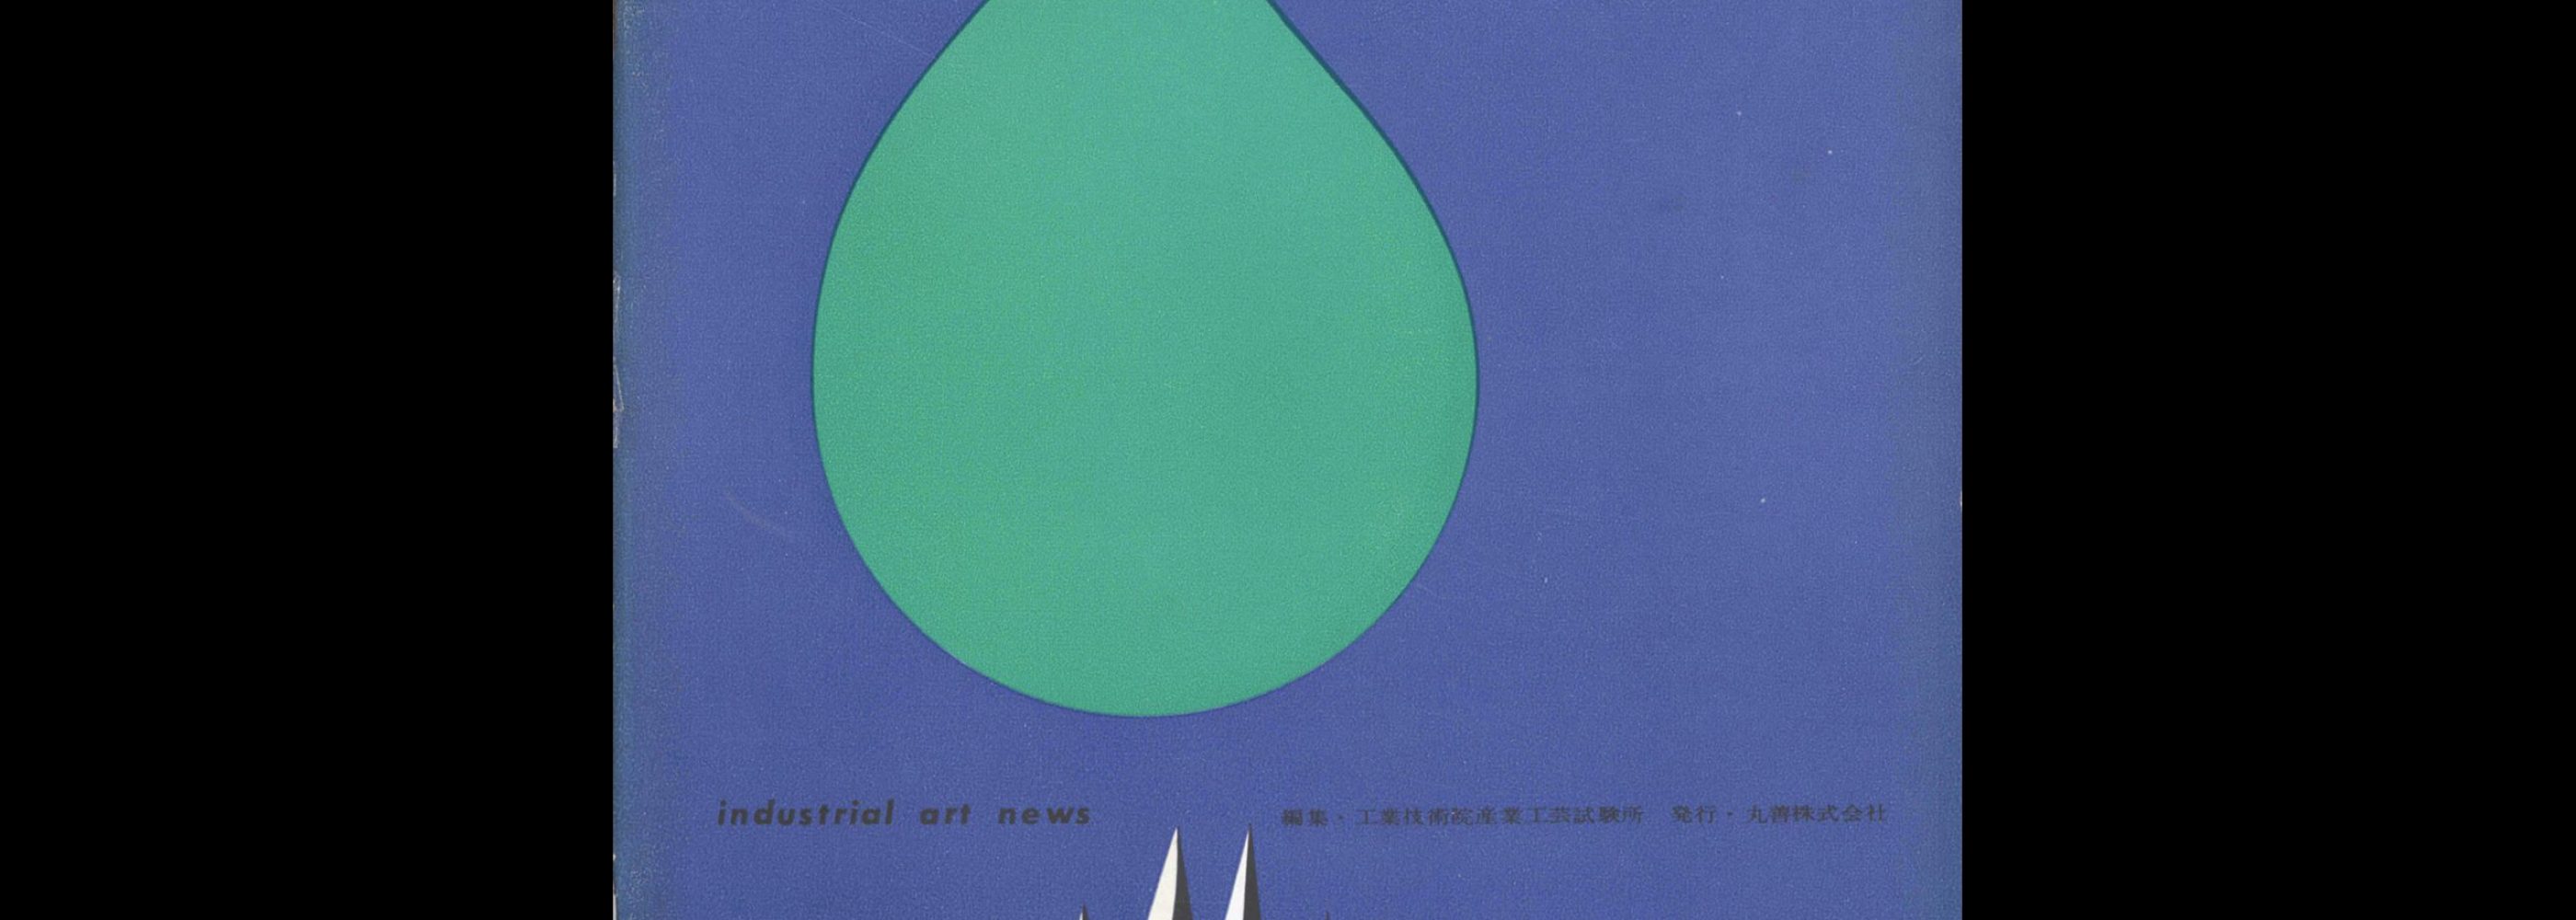 Industrial Art News - Vol. 27, No. 2, February 1959. Cover design by Kenji Ito,